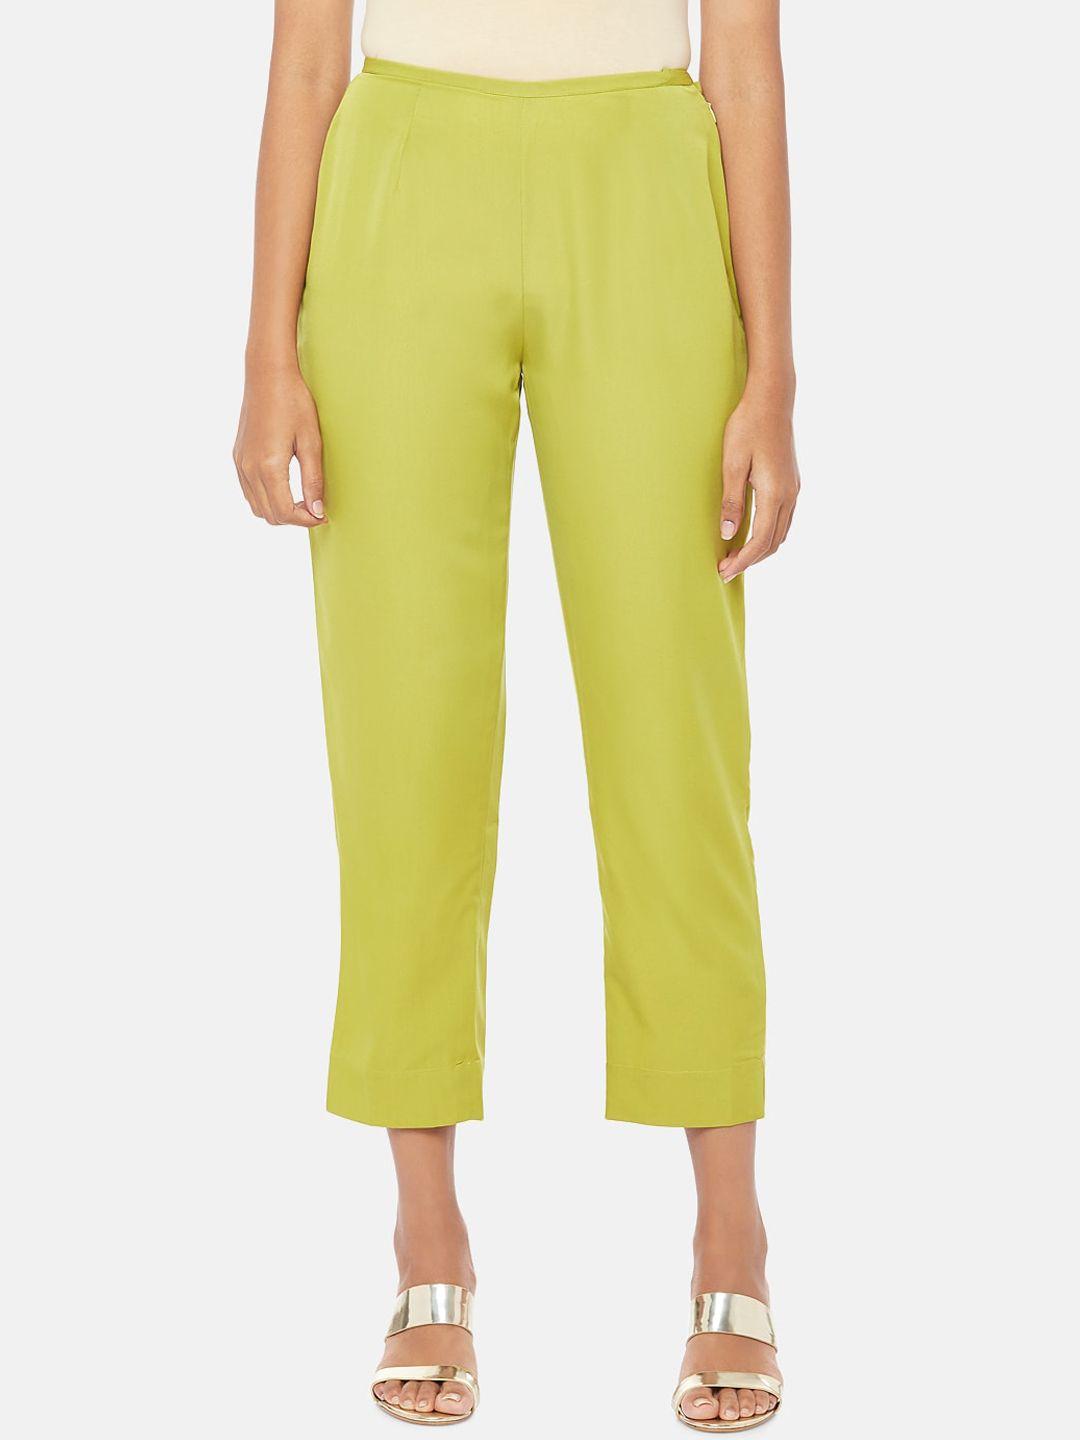 rangmanch-by-pantaloons-women-lime-green-regular-fit-solid-cigarette-trousers